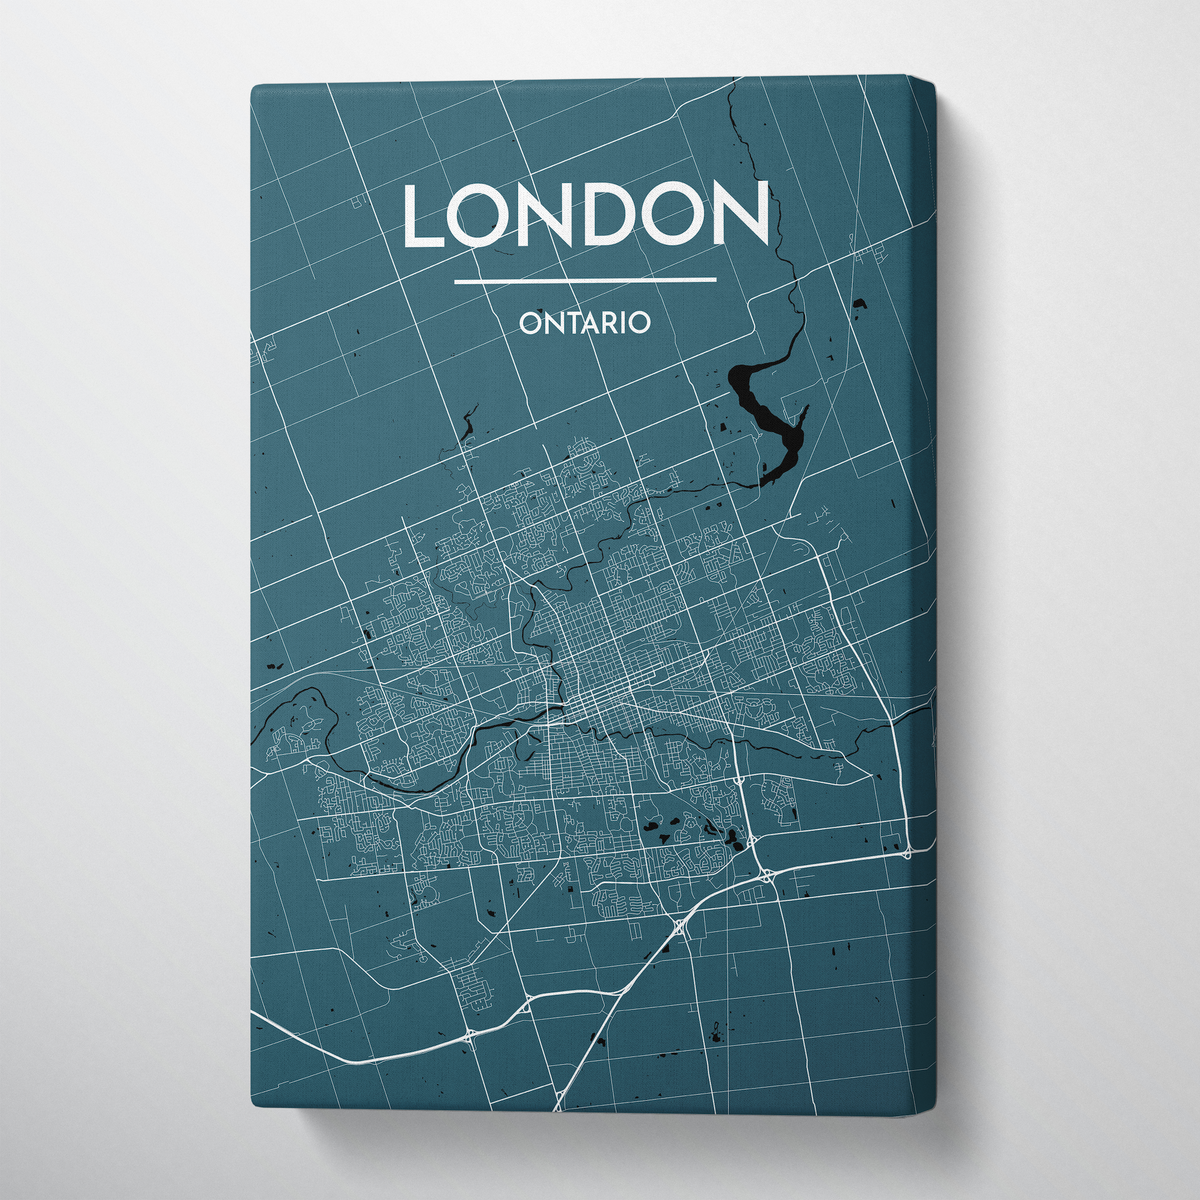 London Ontario City Map Canvas Wrap - Point Two Design